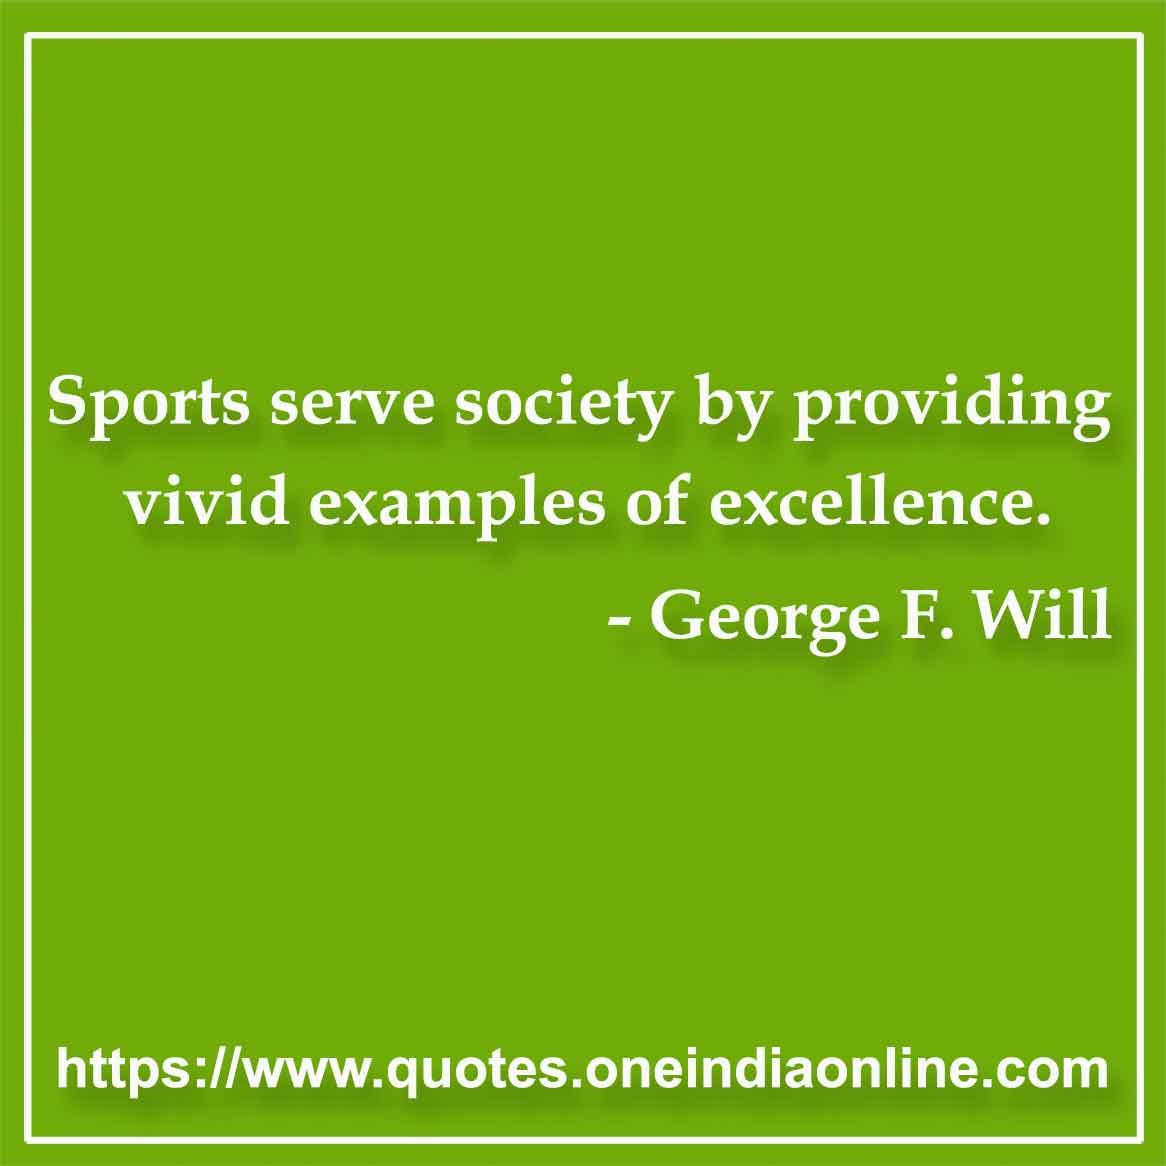 Sports serve society by providing vivid examples of excellence.

- George F. Will Quote